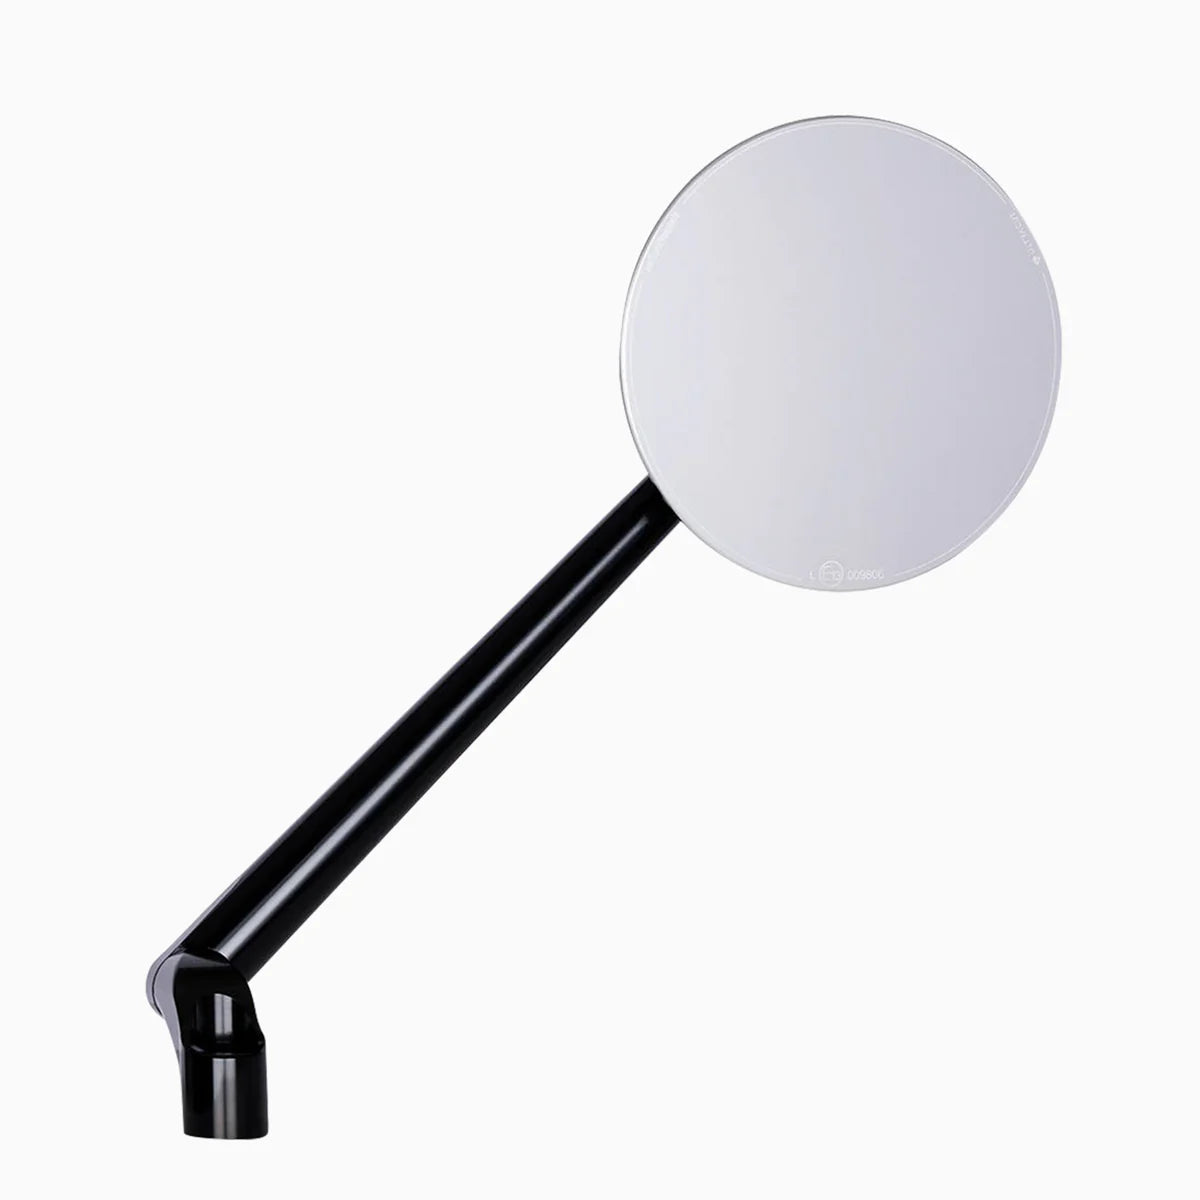 Motogadget Mo.view classic motorcycle rear-view mirror